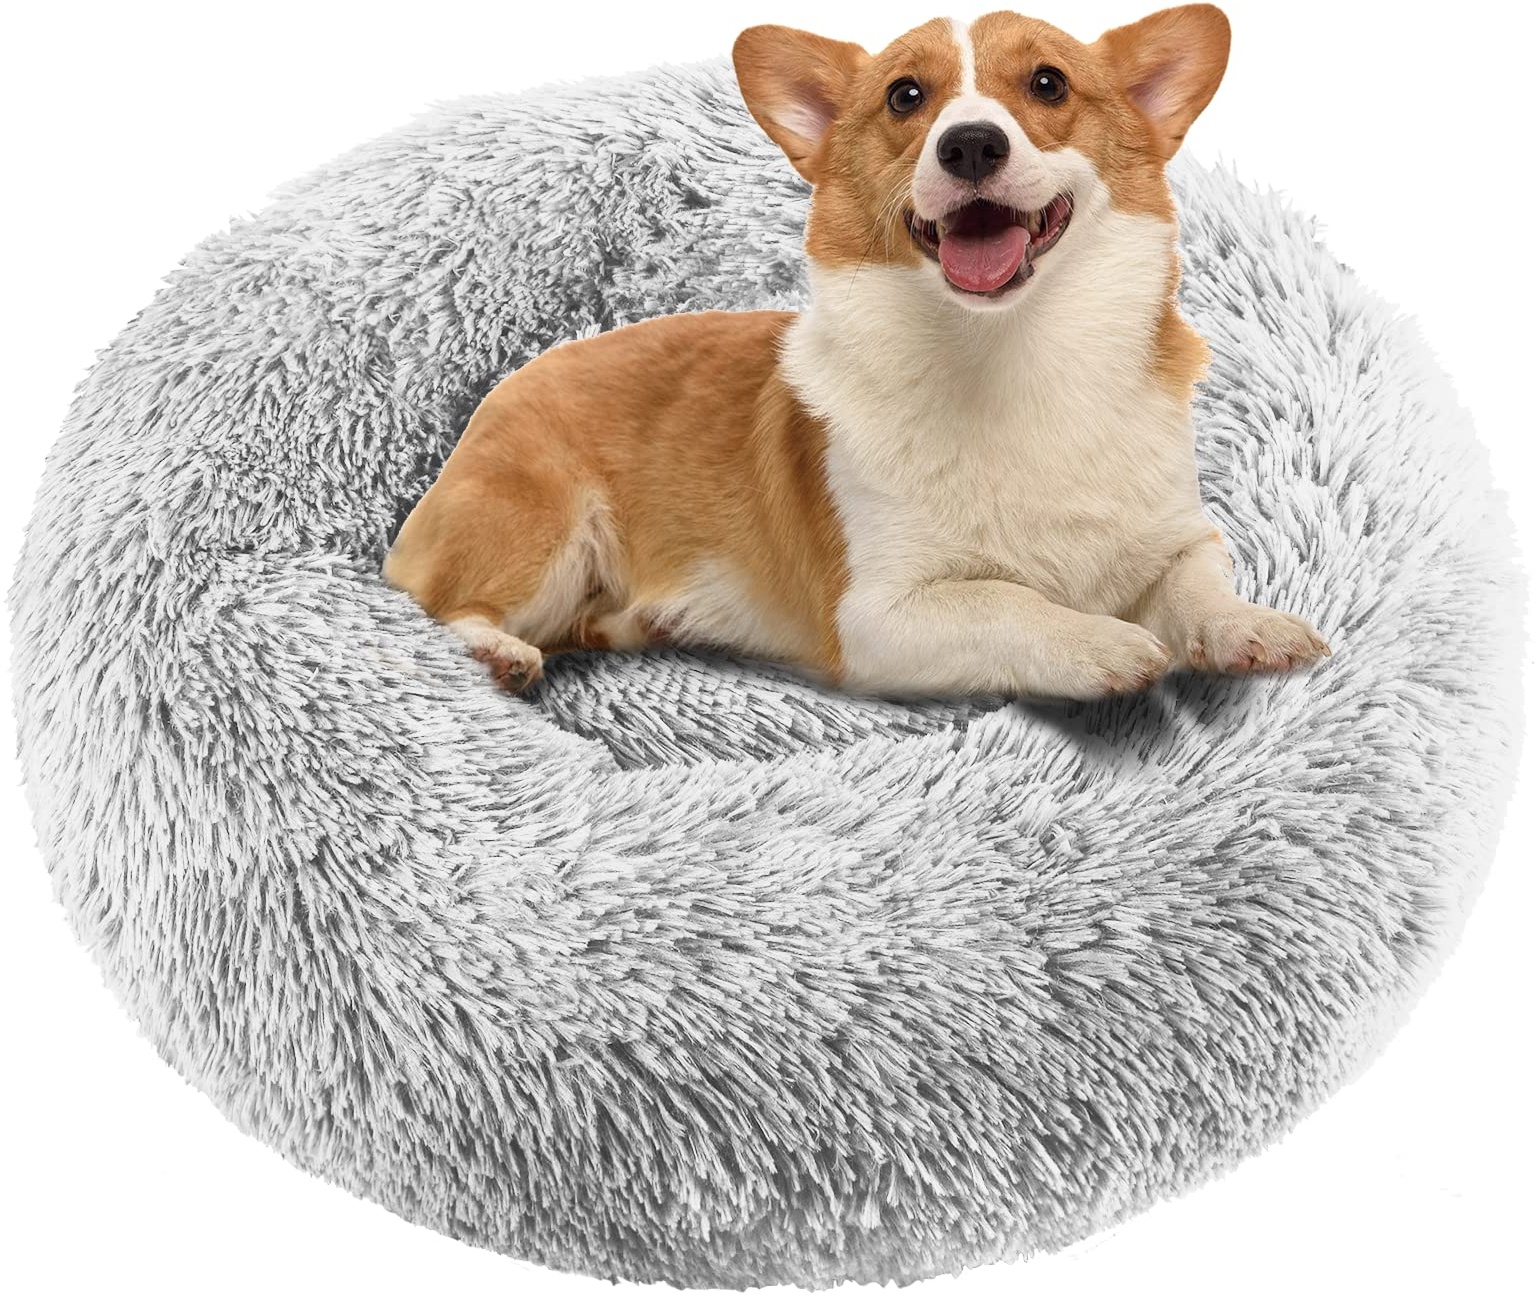 Plush Donut Dog Bed, Calming Cuddler Round Pet Bed, Faux Fur Flauschige Medium Sleeping Mat for Cat Dog Kitten Puppy, Soft and Comfortable Pet Cushion Machine Washable (M, Light Grey)